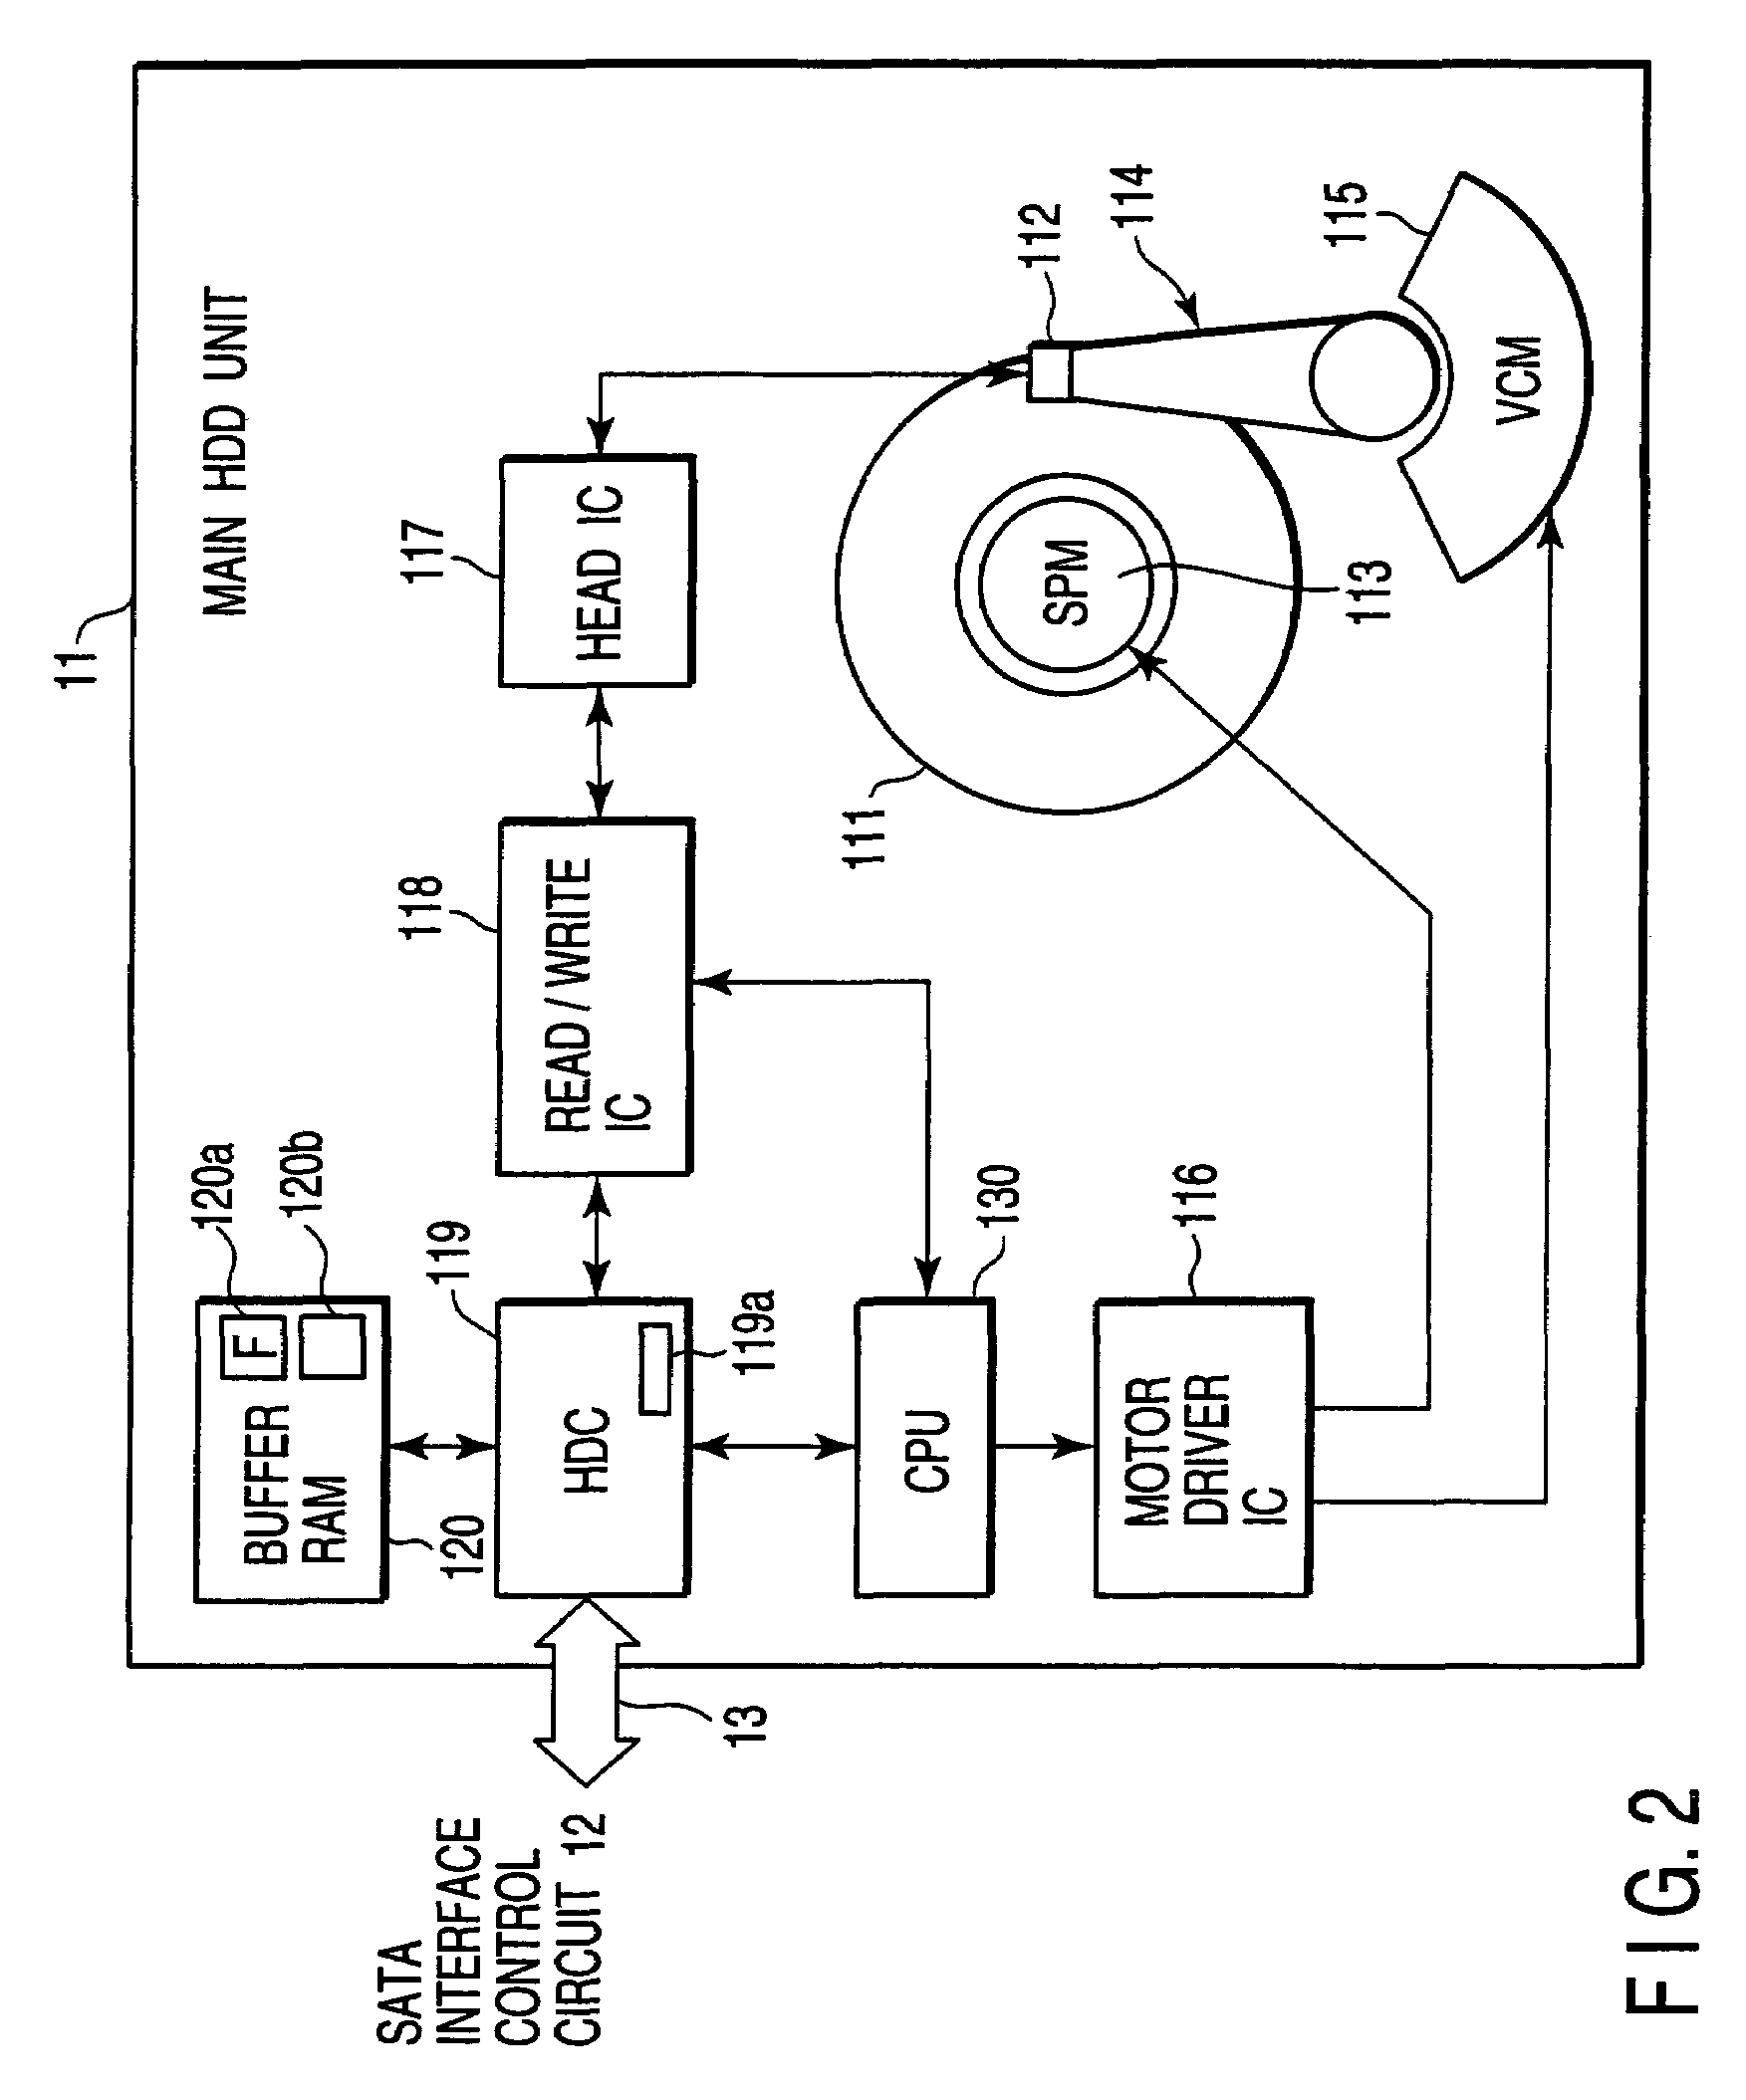 Apparatus and method for saving power in a disk drive with a serial ATA interface connected to a host via a serial ATA bus